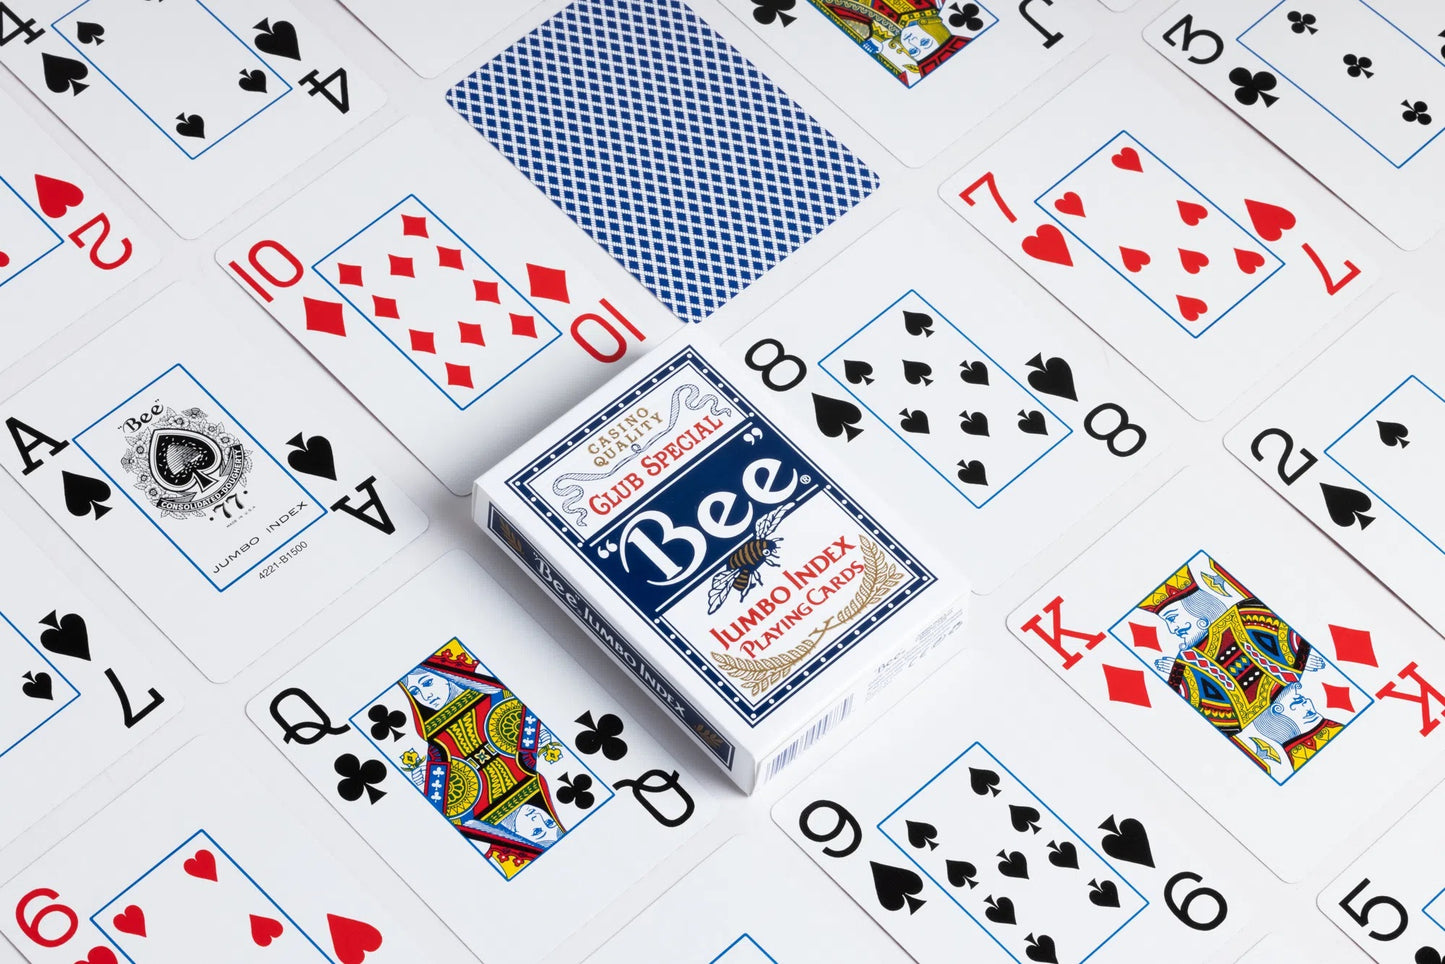 Bee Jumbo Index Blue Playing Cards - Casino Quality